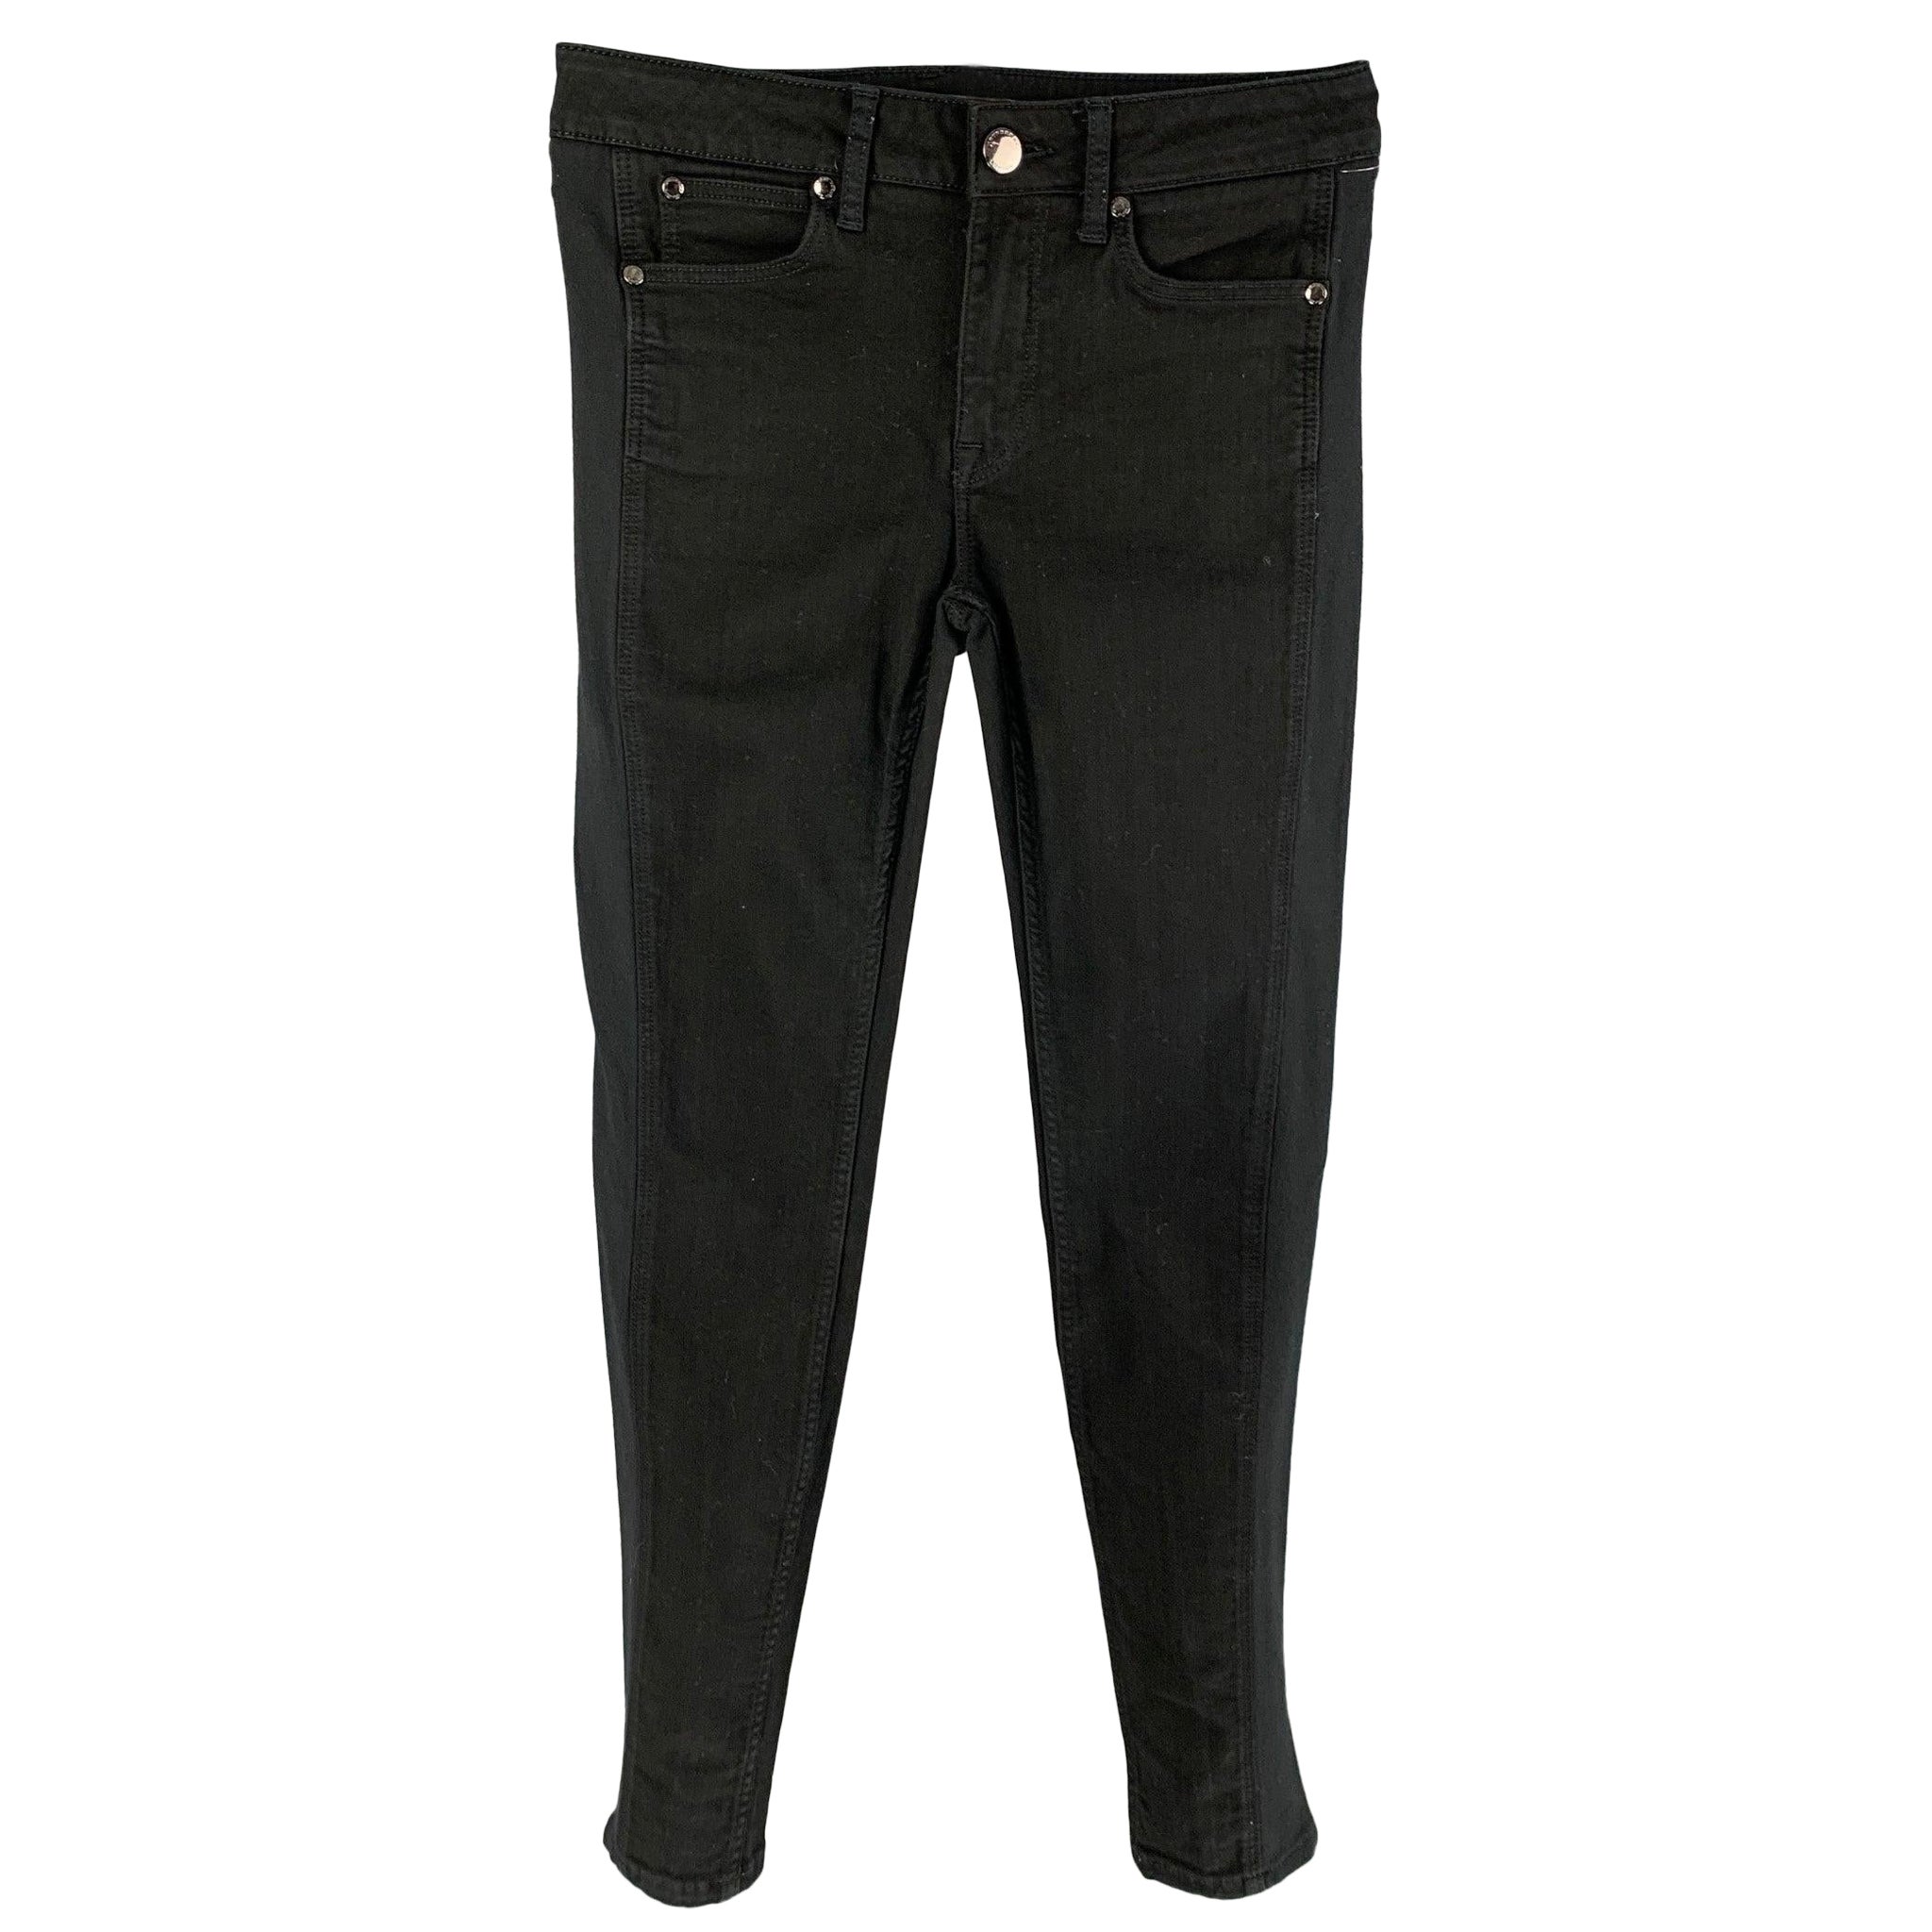 BURBERRY LONDON Size 29 Black Skinny Jeans For Sale